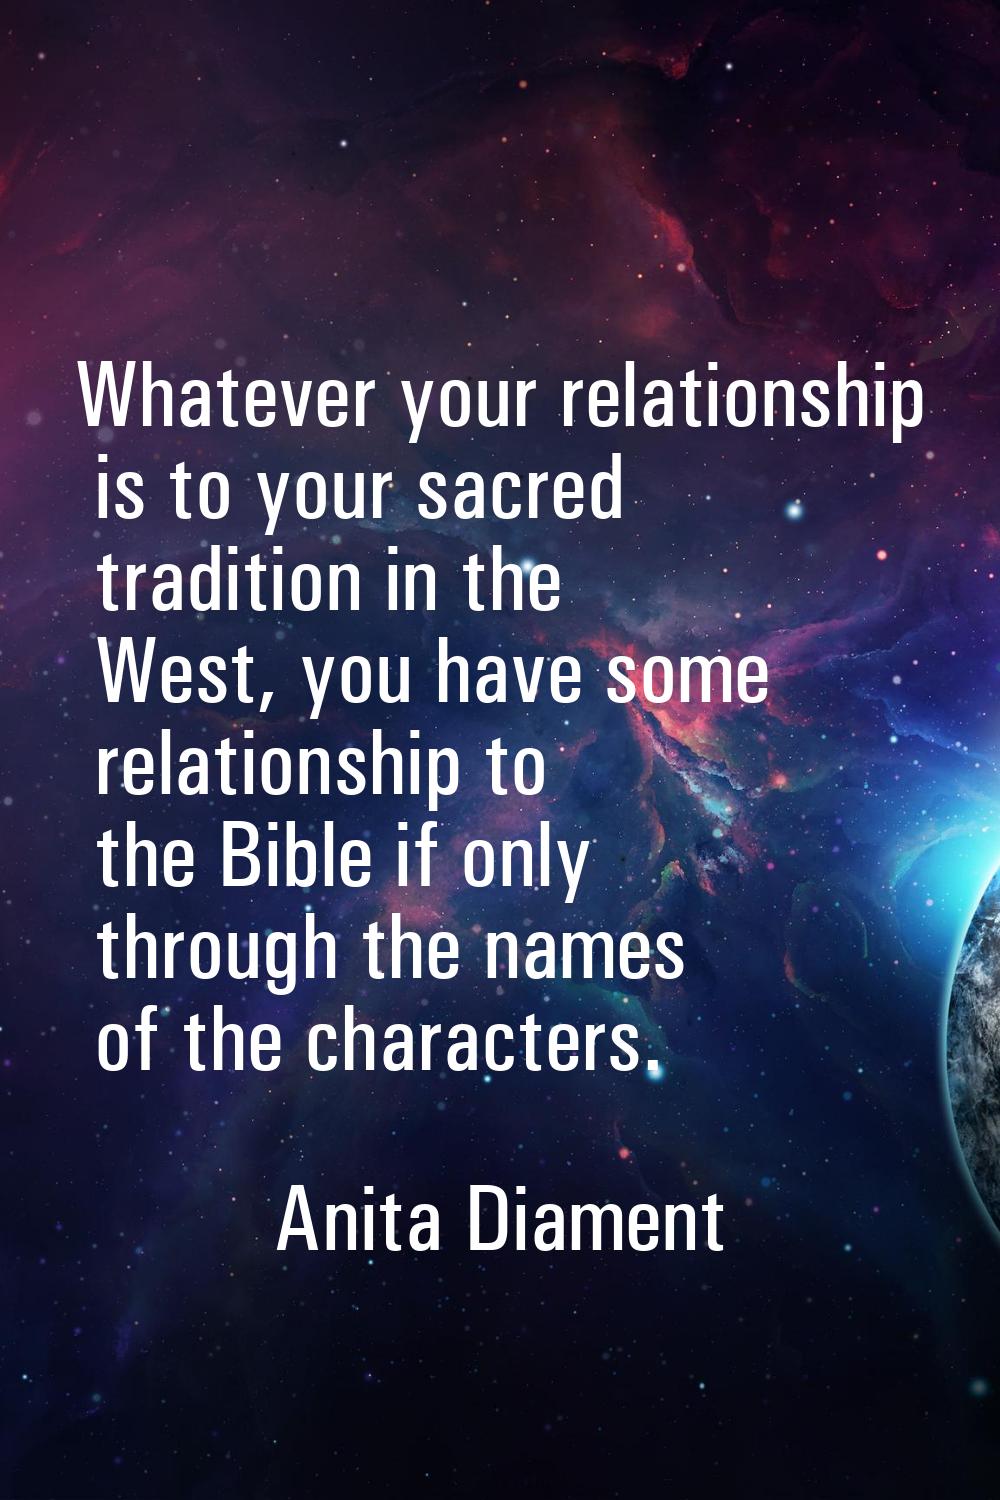 Whatever your relationship is to your sacred tradition in the West, you have some relationship to t